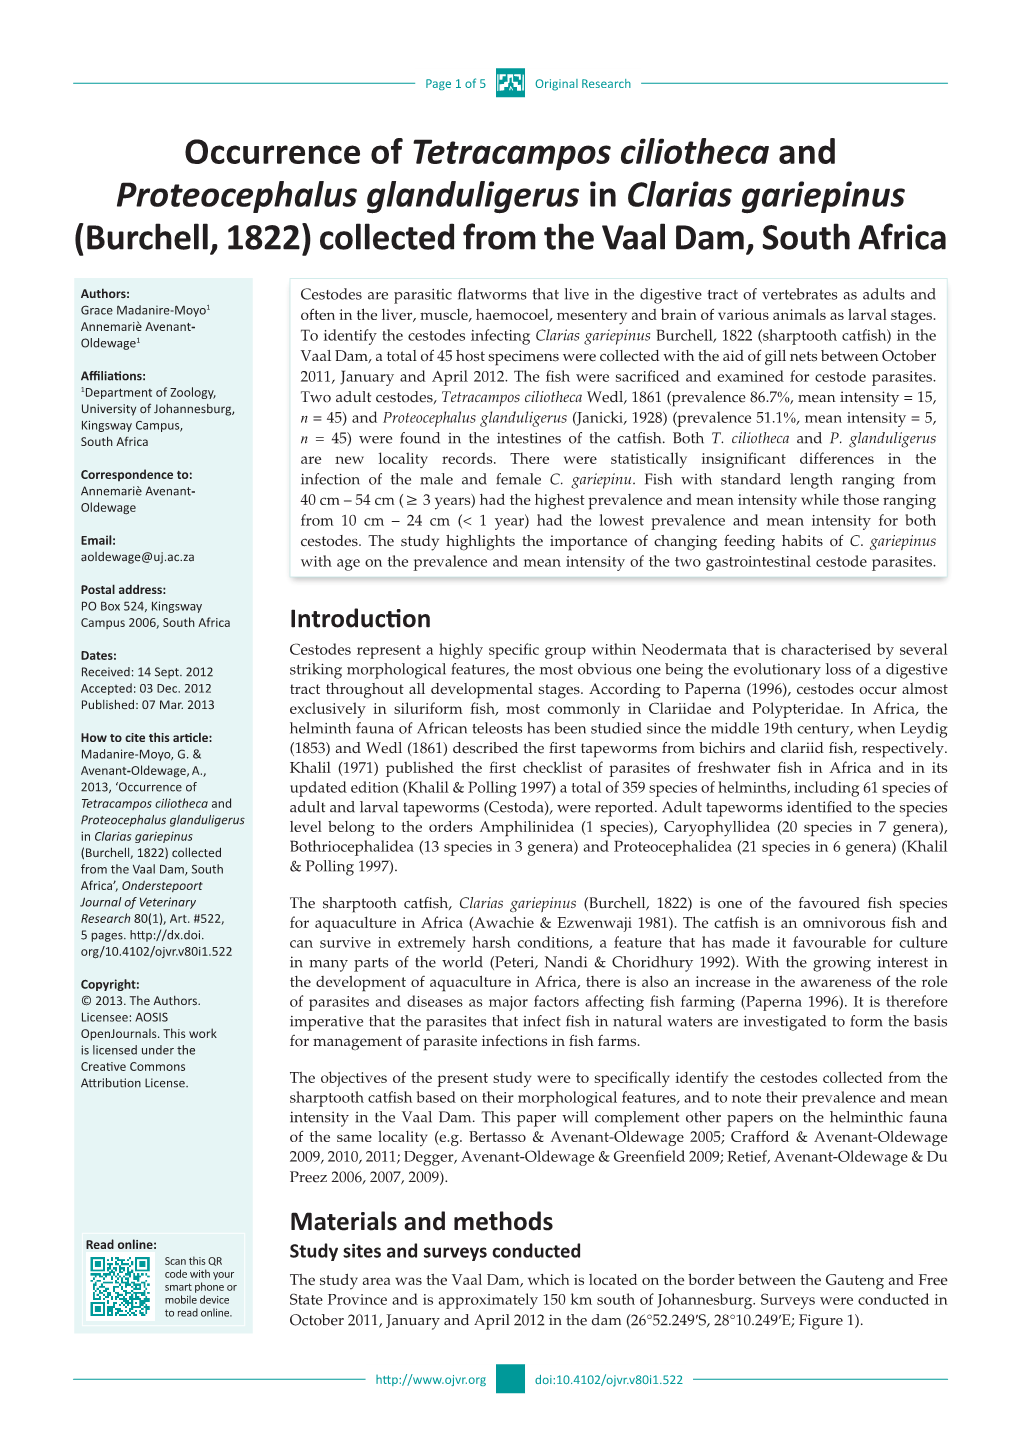 Occurrence of Tetracampos Ciliotheca and Proteocephalus Glanduligerus in Clarias Gariepinus (Burchell, 1822) Collected from the Vaal Dam, South Africa